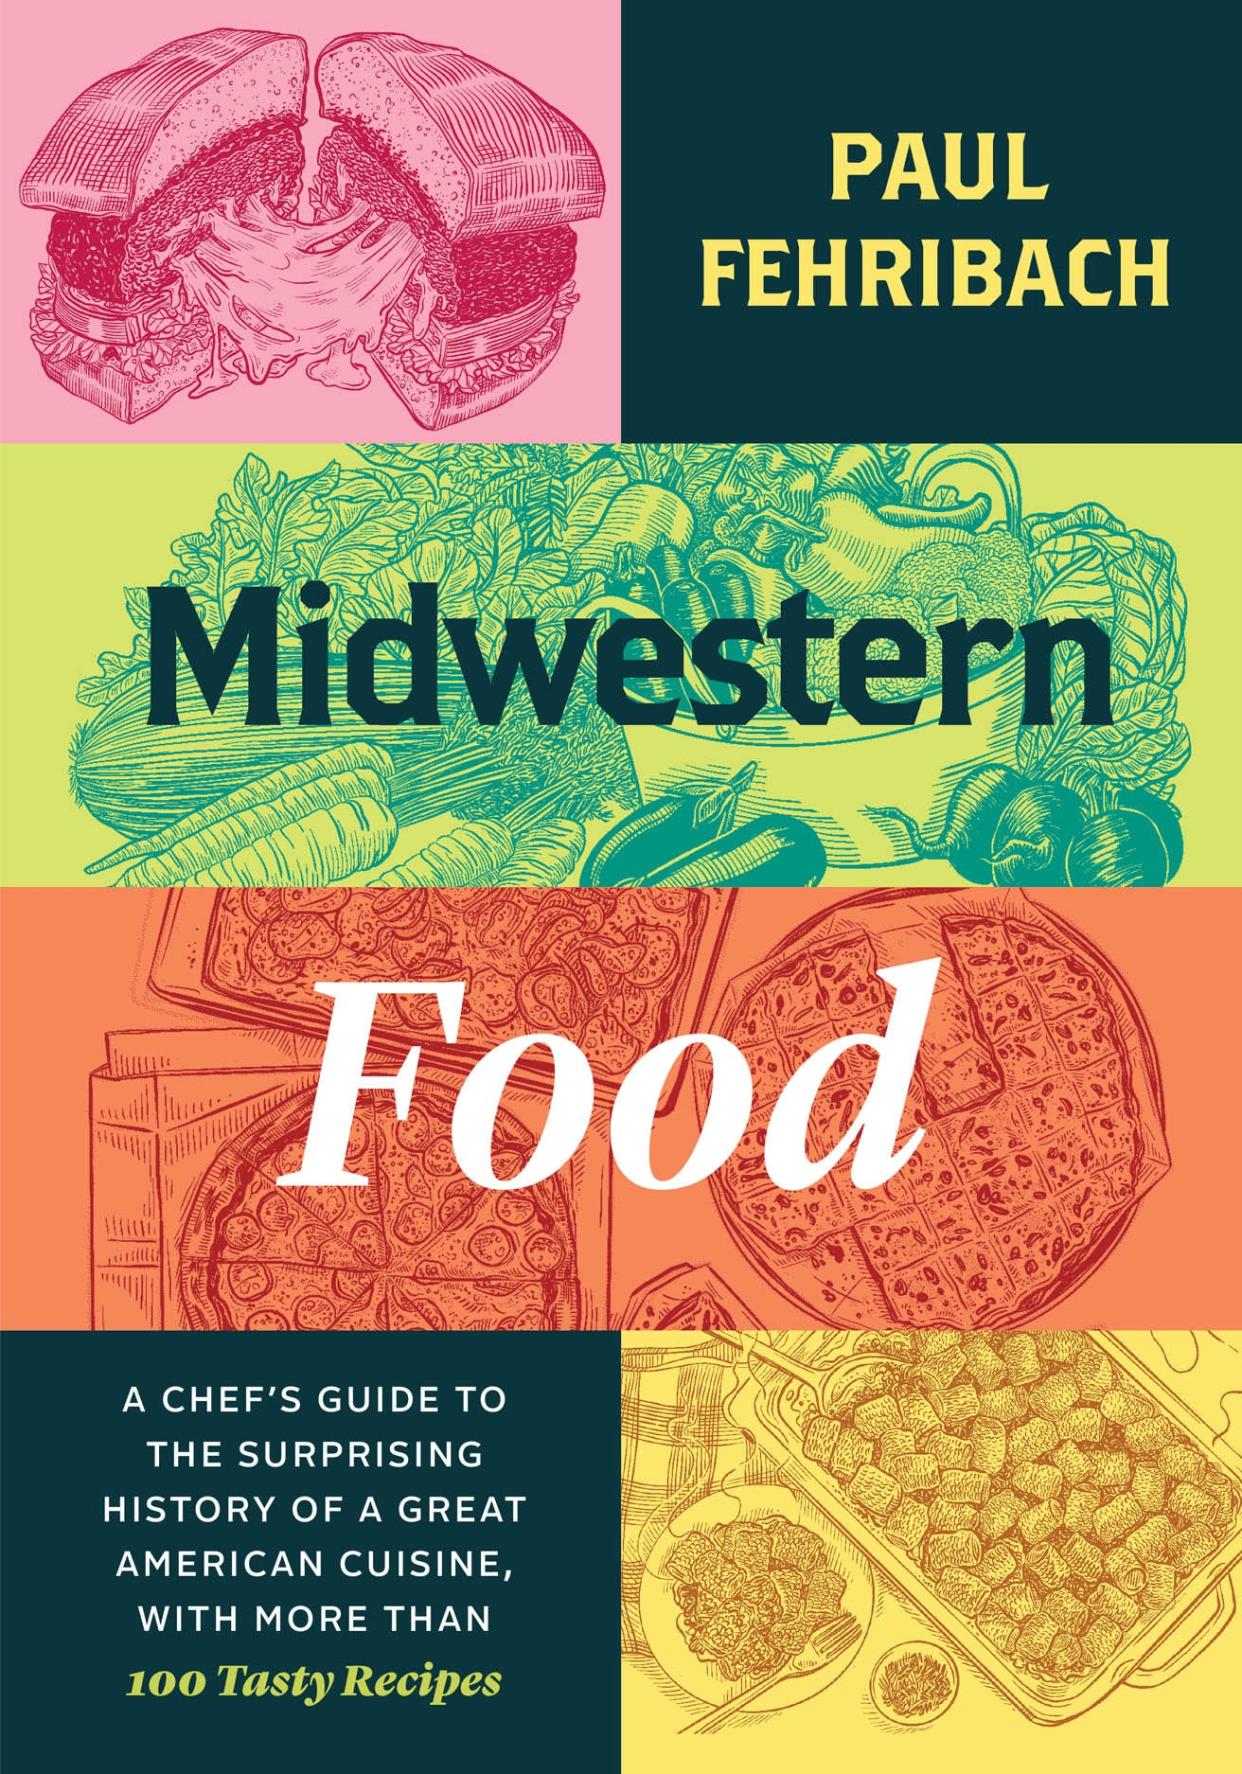 The cover or Midwestern Food.